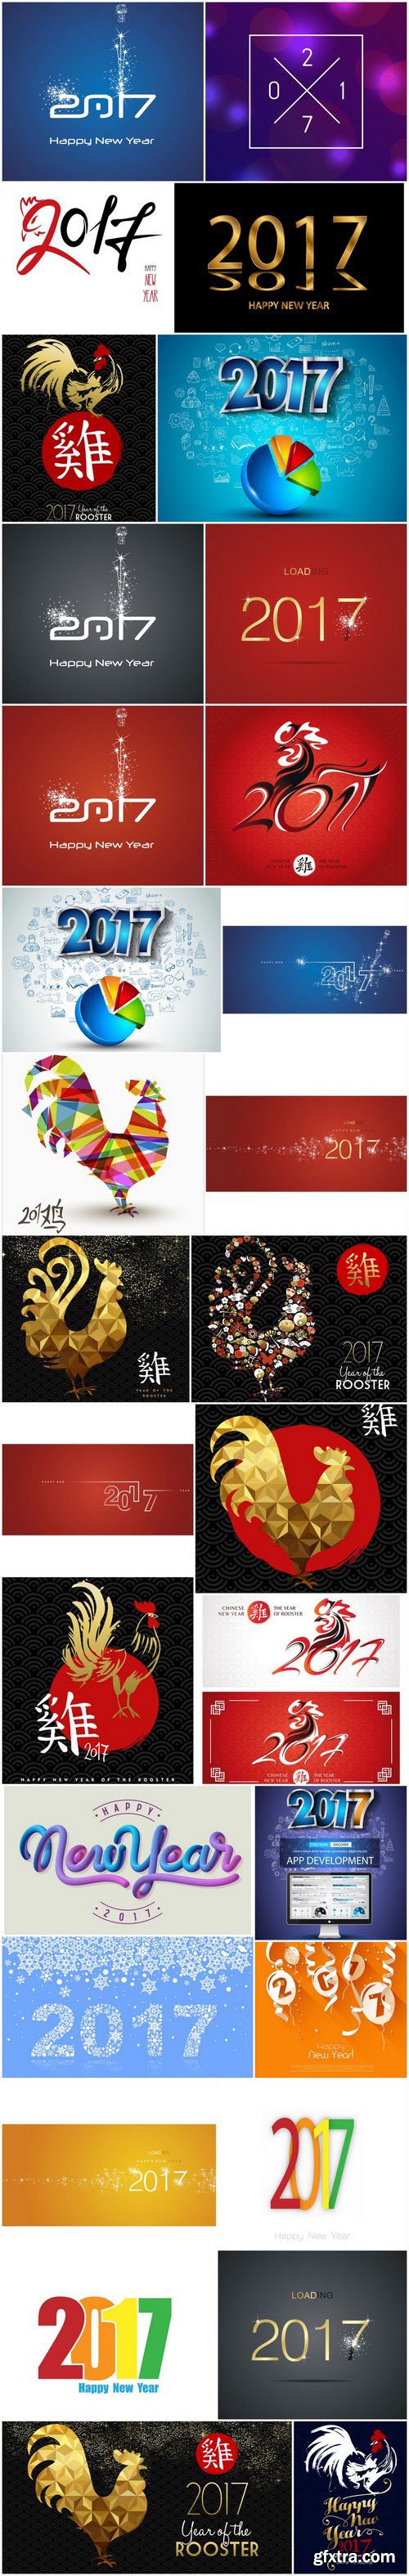 2017 - The Year of Fire Rooster 2 - Set of 30xEPS, AI Professional Vector Stock (Копировать)